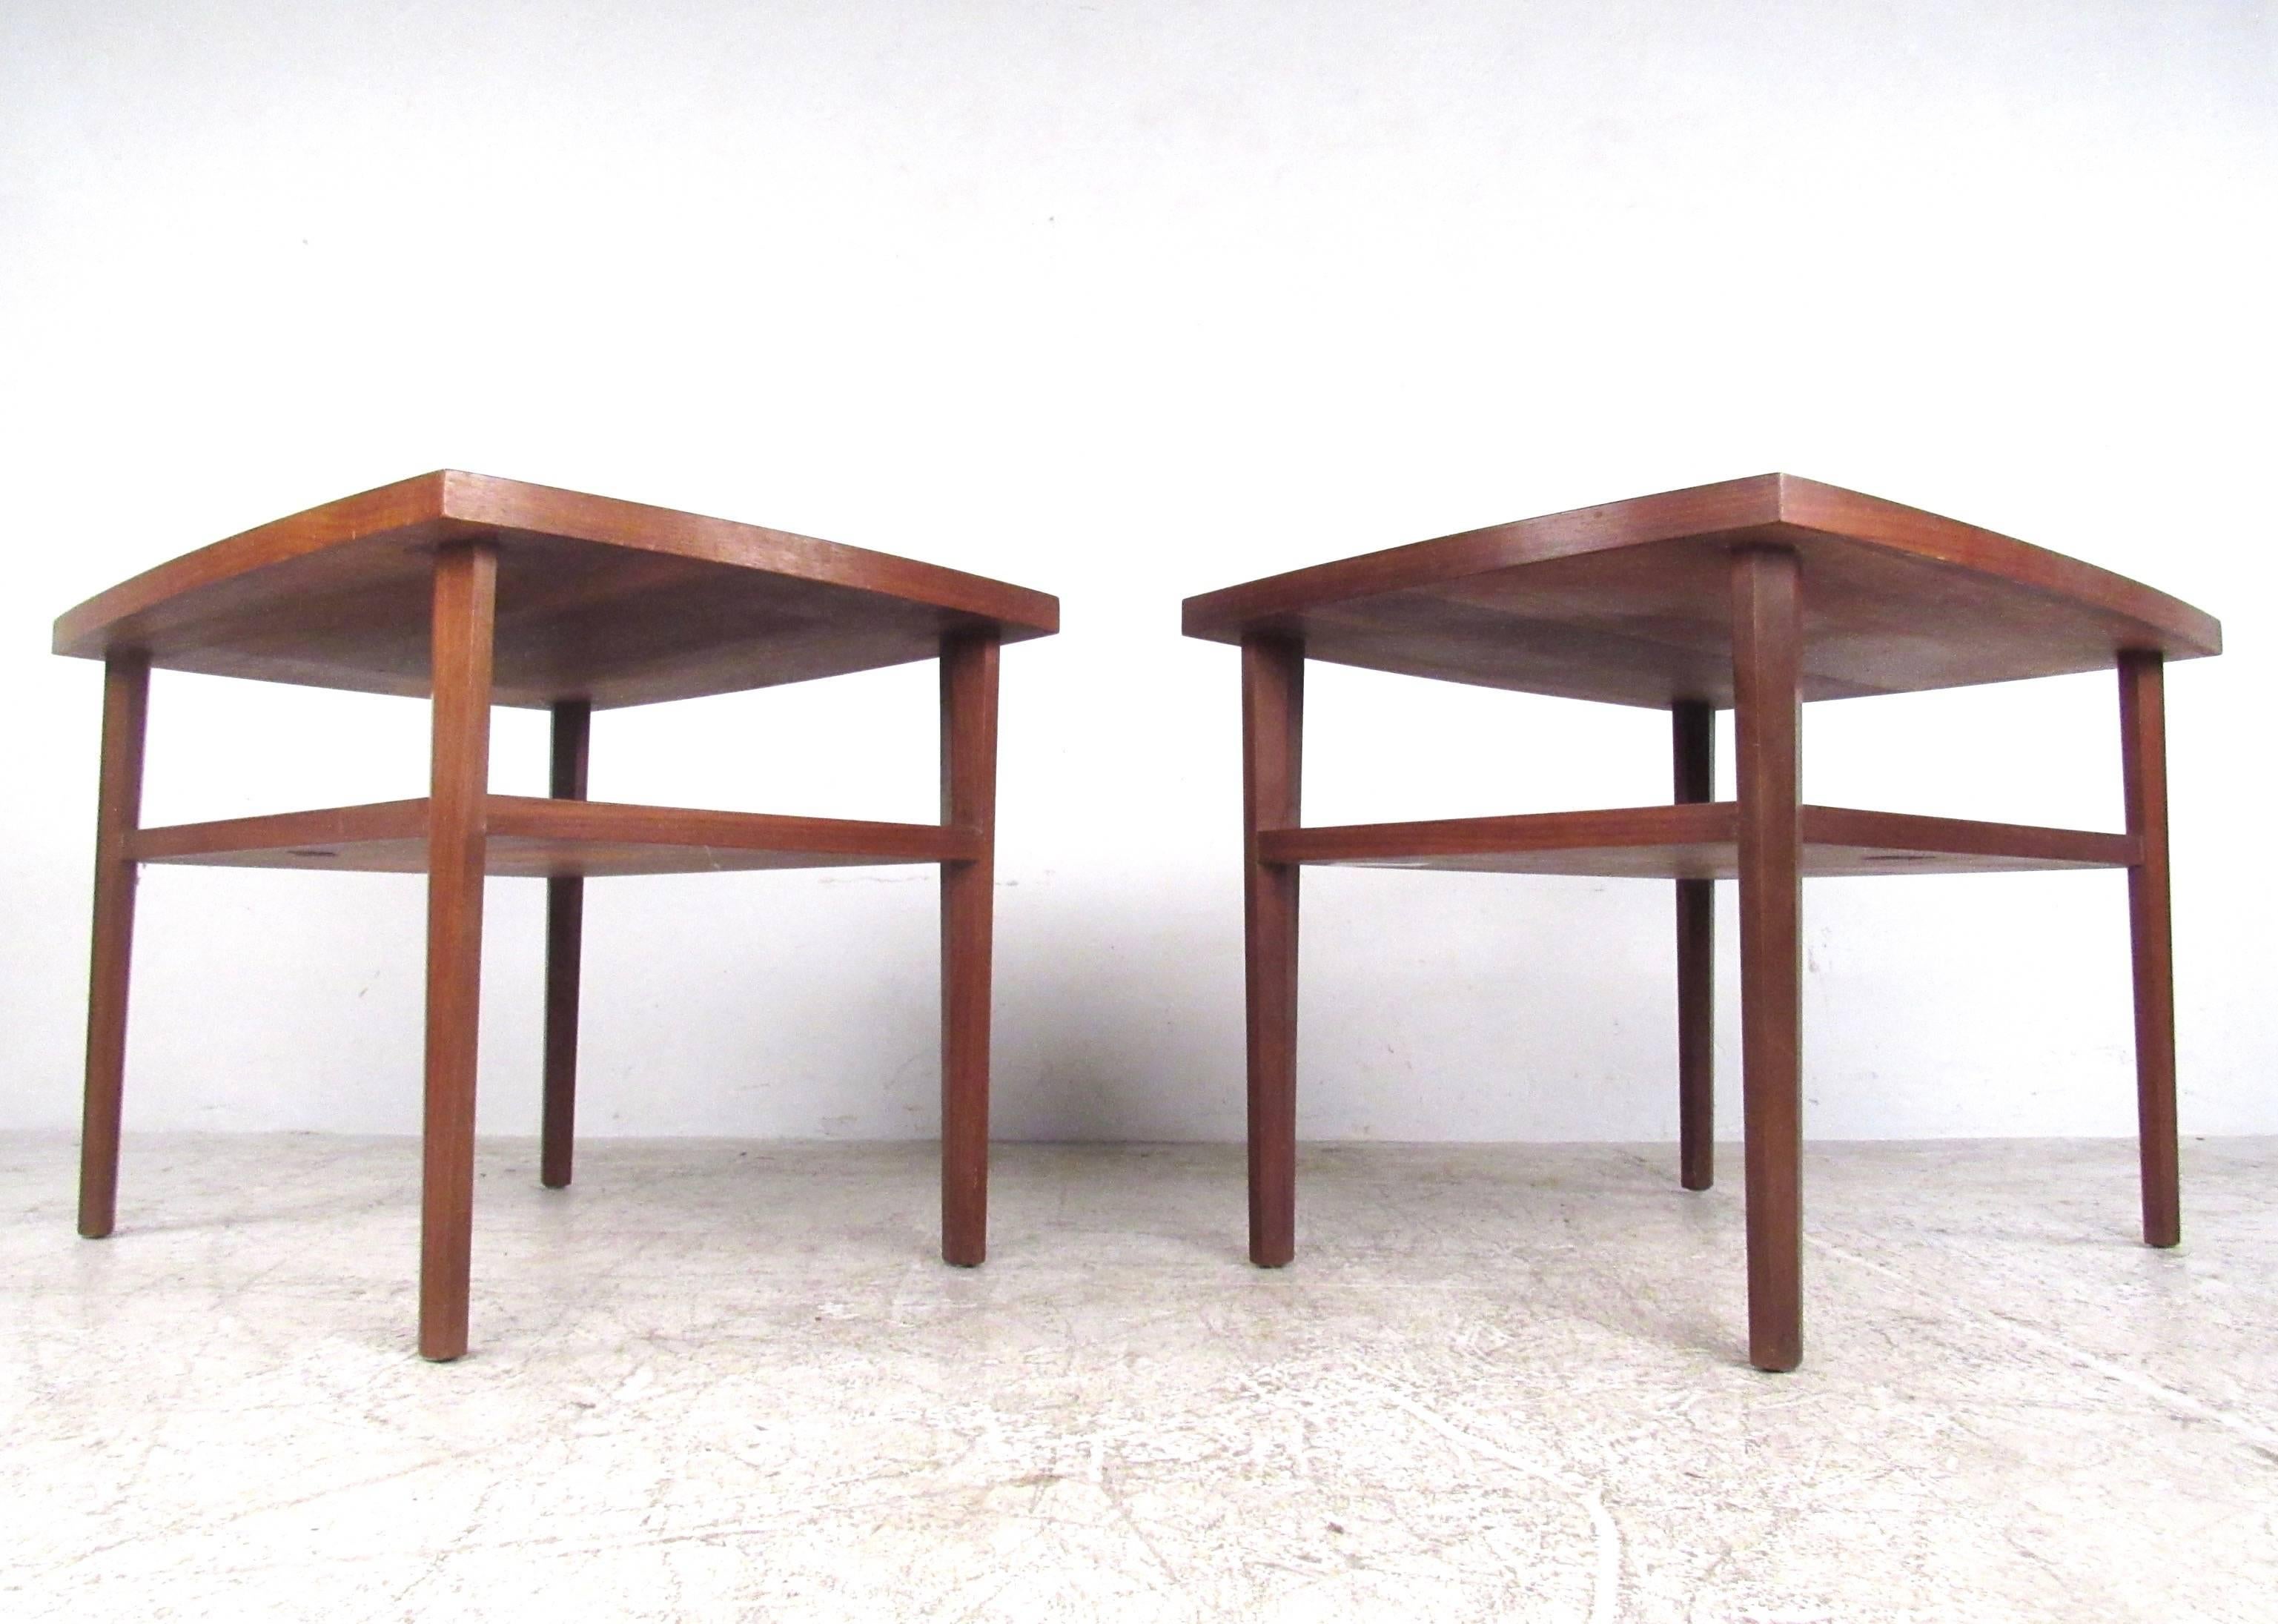 The stunning simplicity of this beautiful vintage pair of tables lies in their subtle shape, sundra finish and high quality walnut construction. Sculpted legs, a two-tier design and original manufacturer's label showcase the impressive Mid-Century